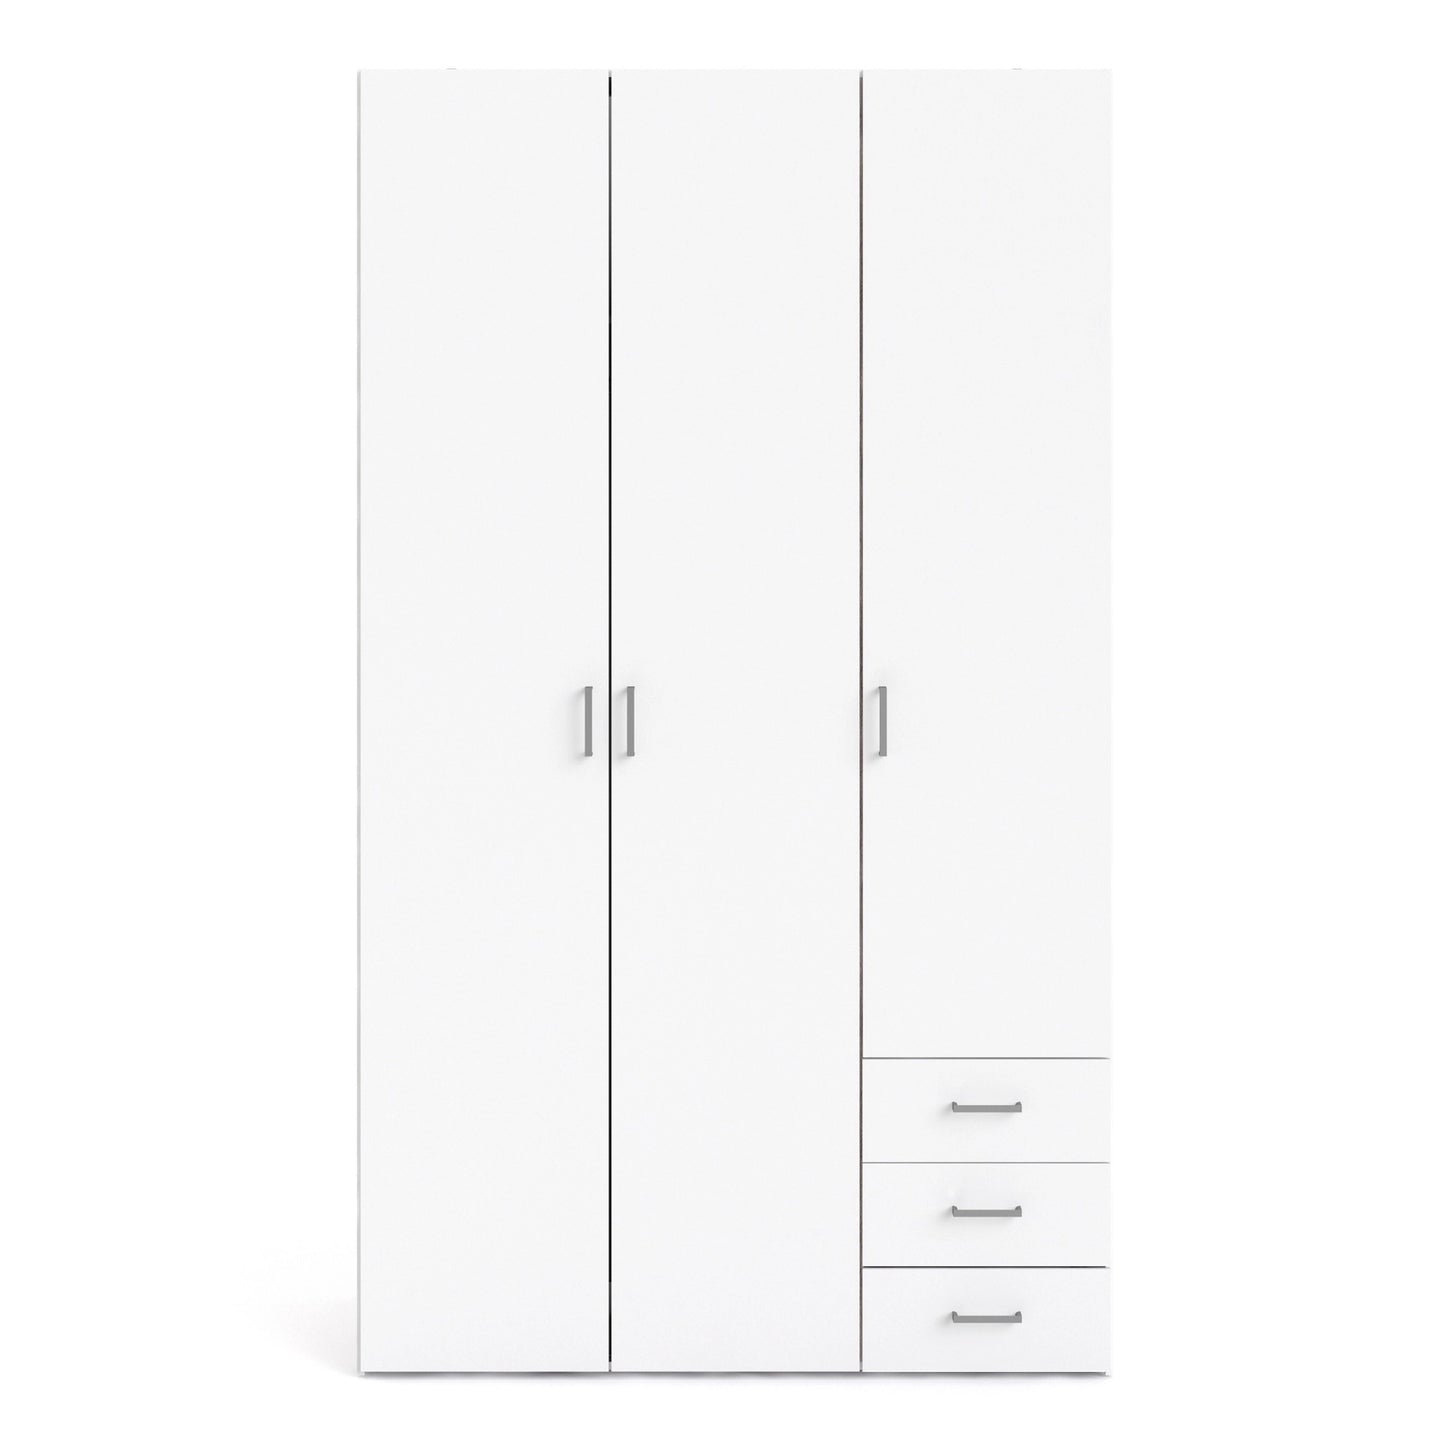 Furniture To Go Space Wardrobe - 3 Doors 3 Drawers in White 2000